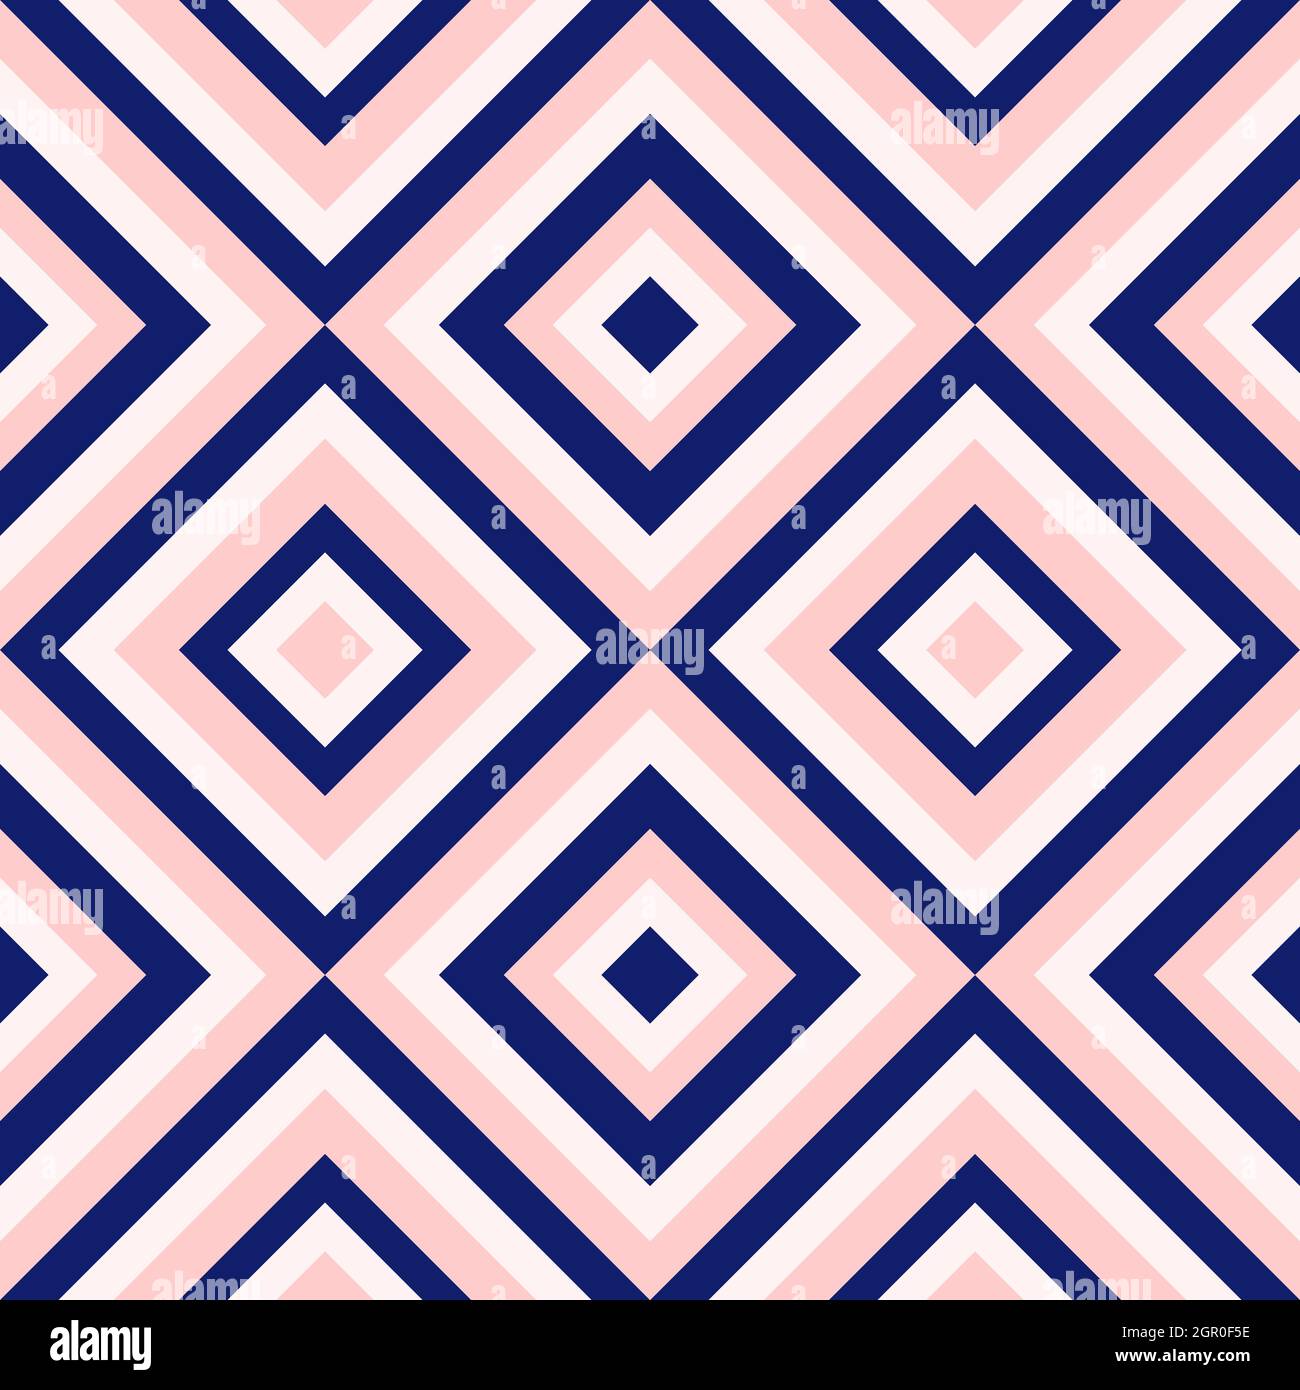 Diamond shapes pattern. Abstract geometry in navy blue and blush pink. Seamless vector pattern. Millennial pink background. Fashion fabric pattern des Stock Vector